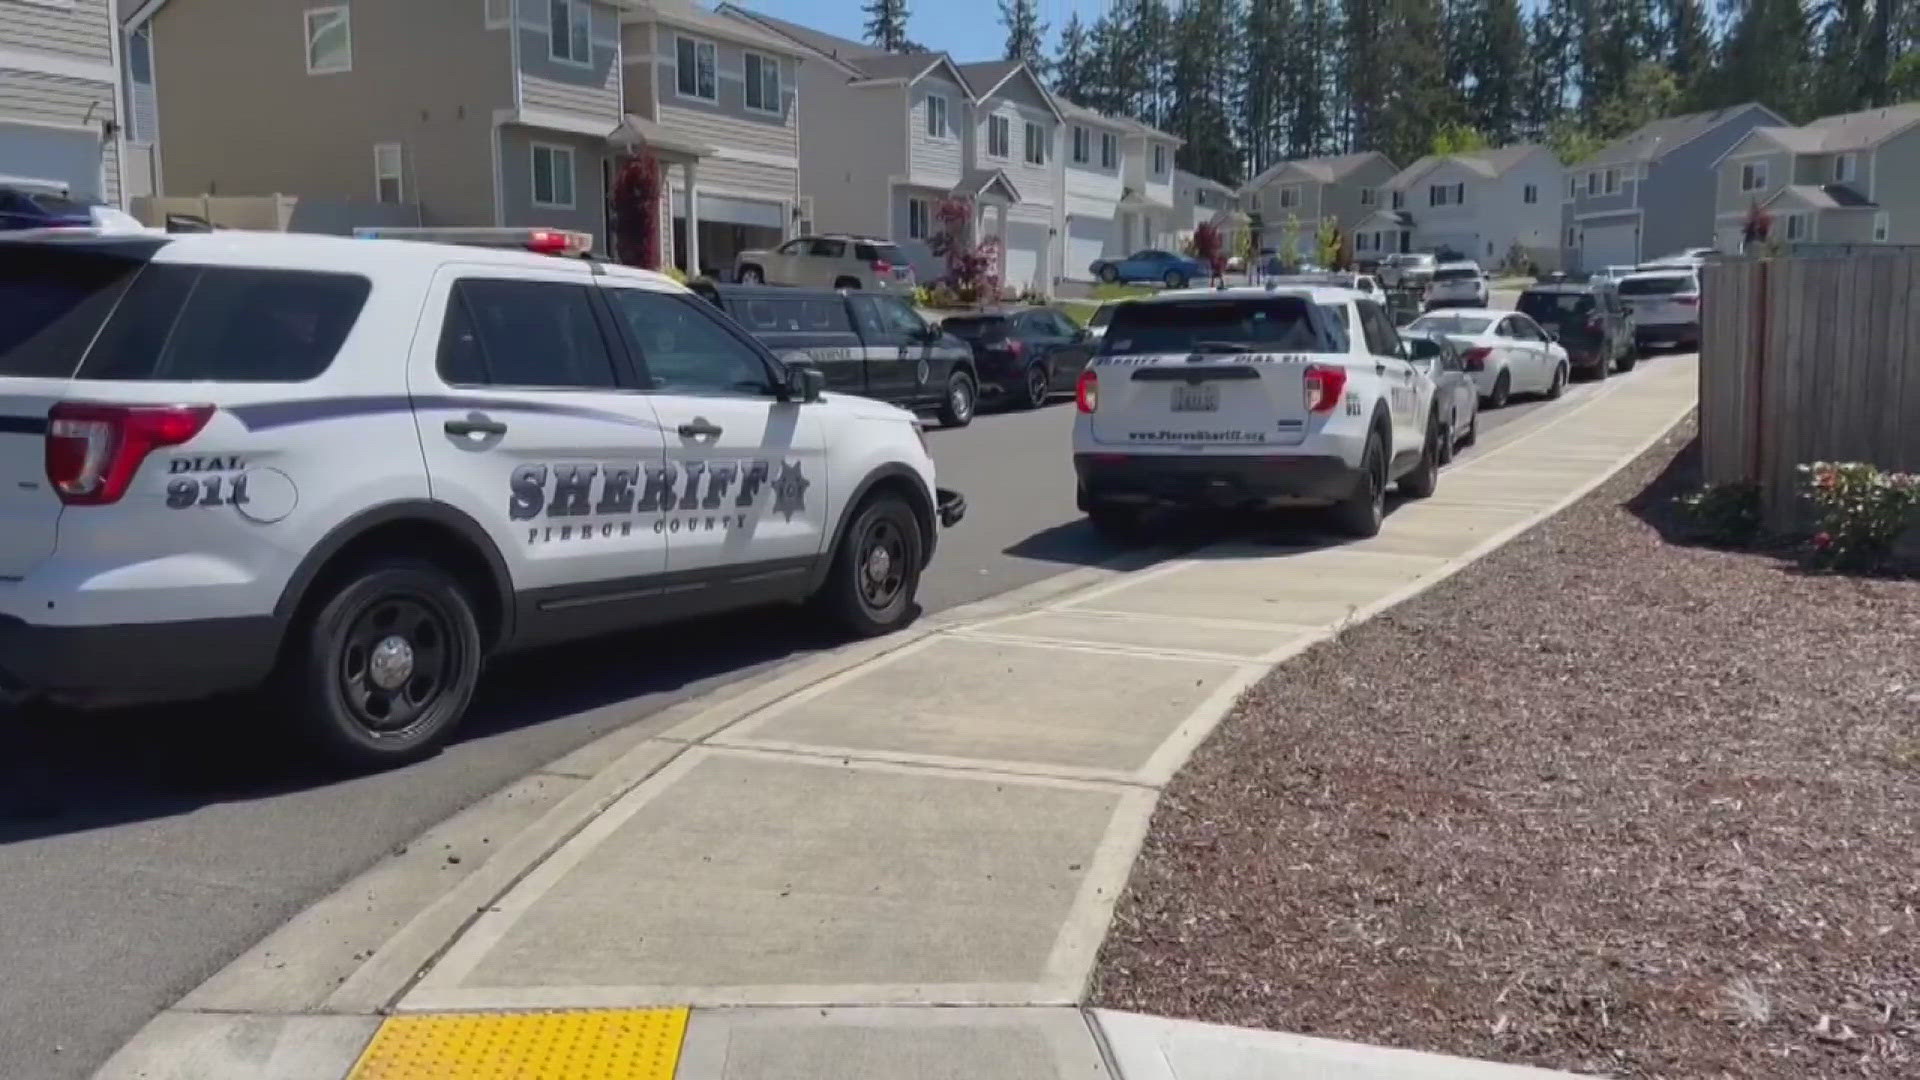 Drug paraphernalia was found near the body of a 13-year-old boy who died of an apparent overdose in Spanaway